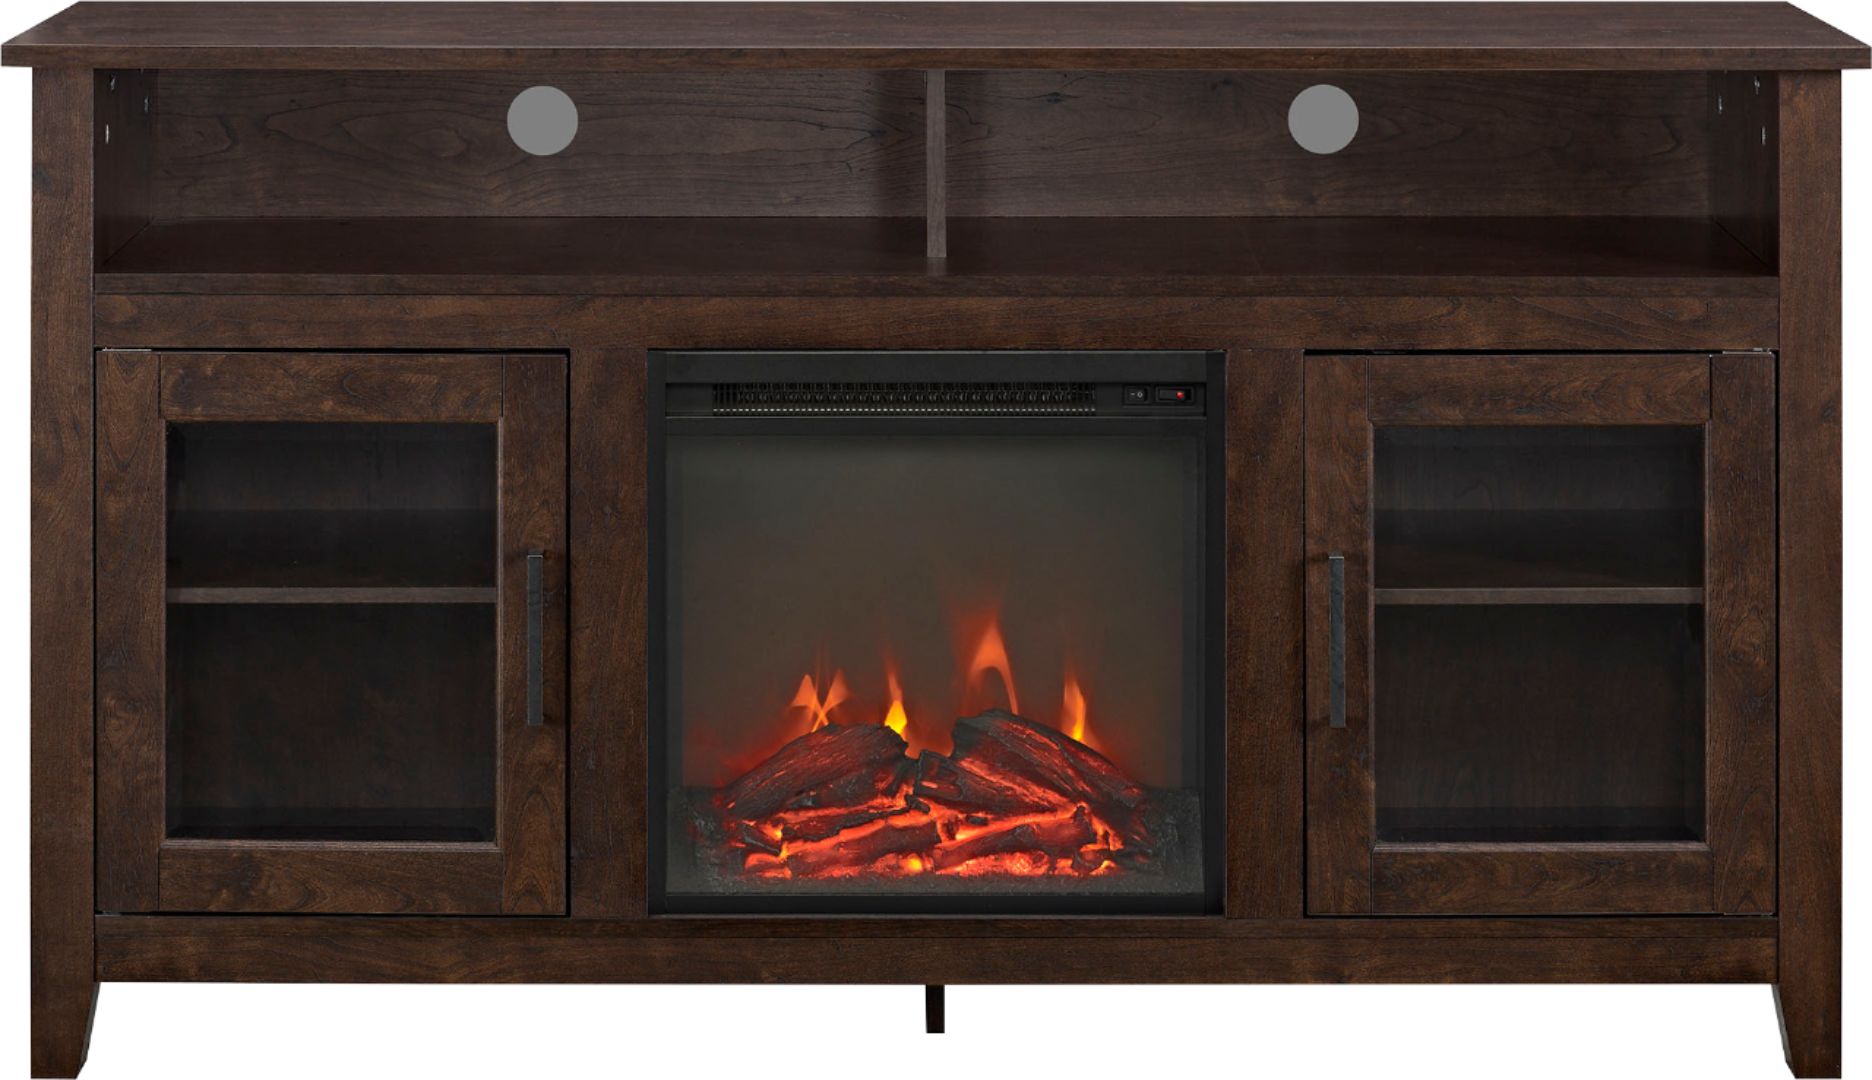 Walker Edison - Tall Glass Two Door Soundbar Storage Fireplace TV Stand for Most TVs Up to 65" - Traditional Brown